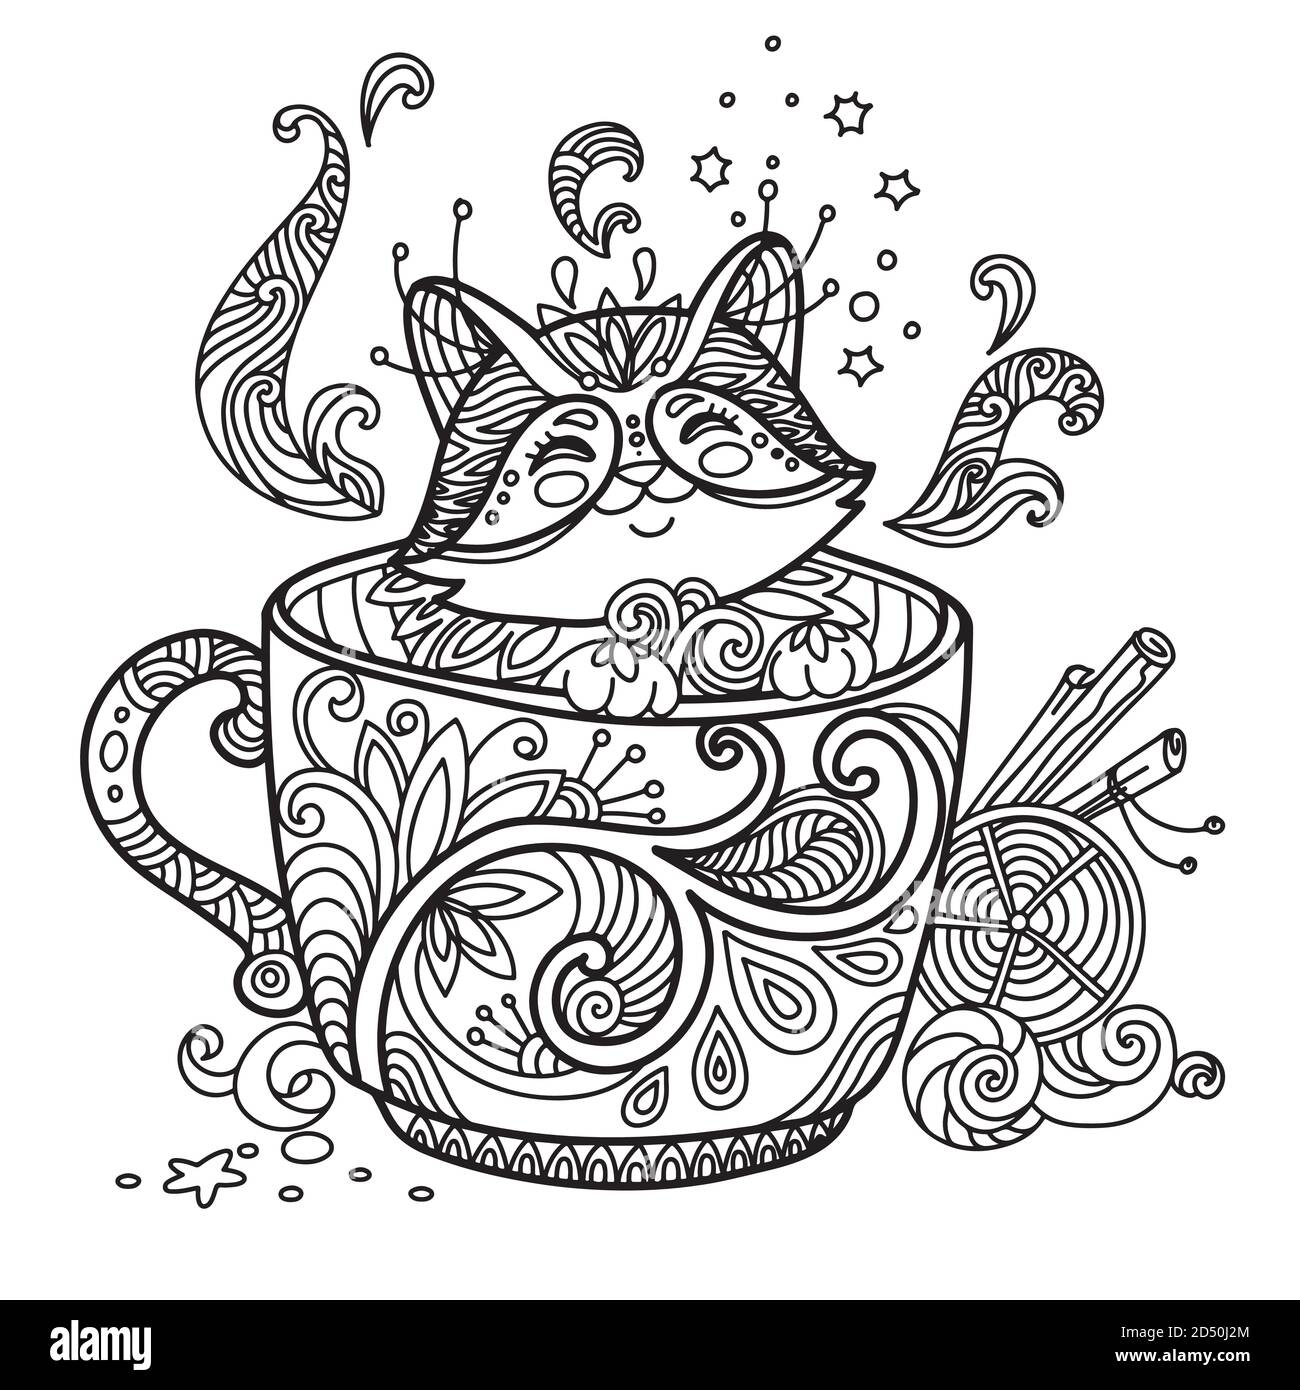 Coloring page napping cat in a mug